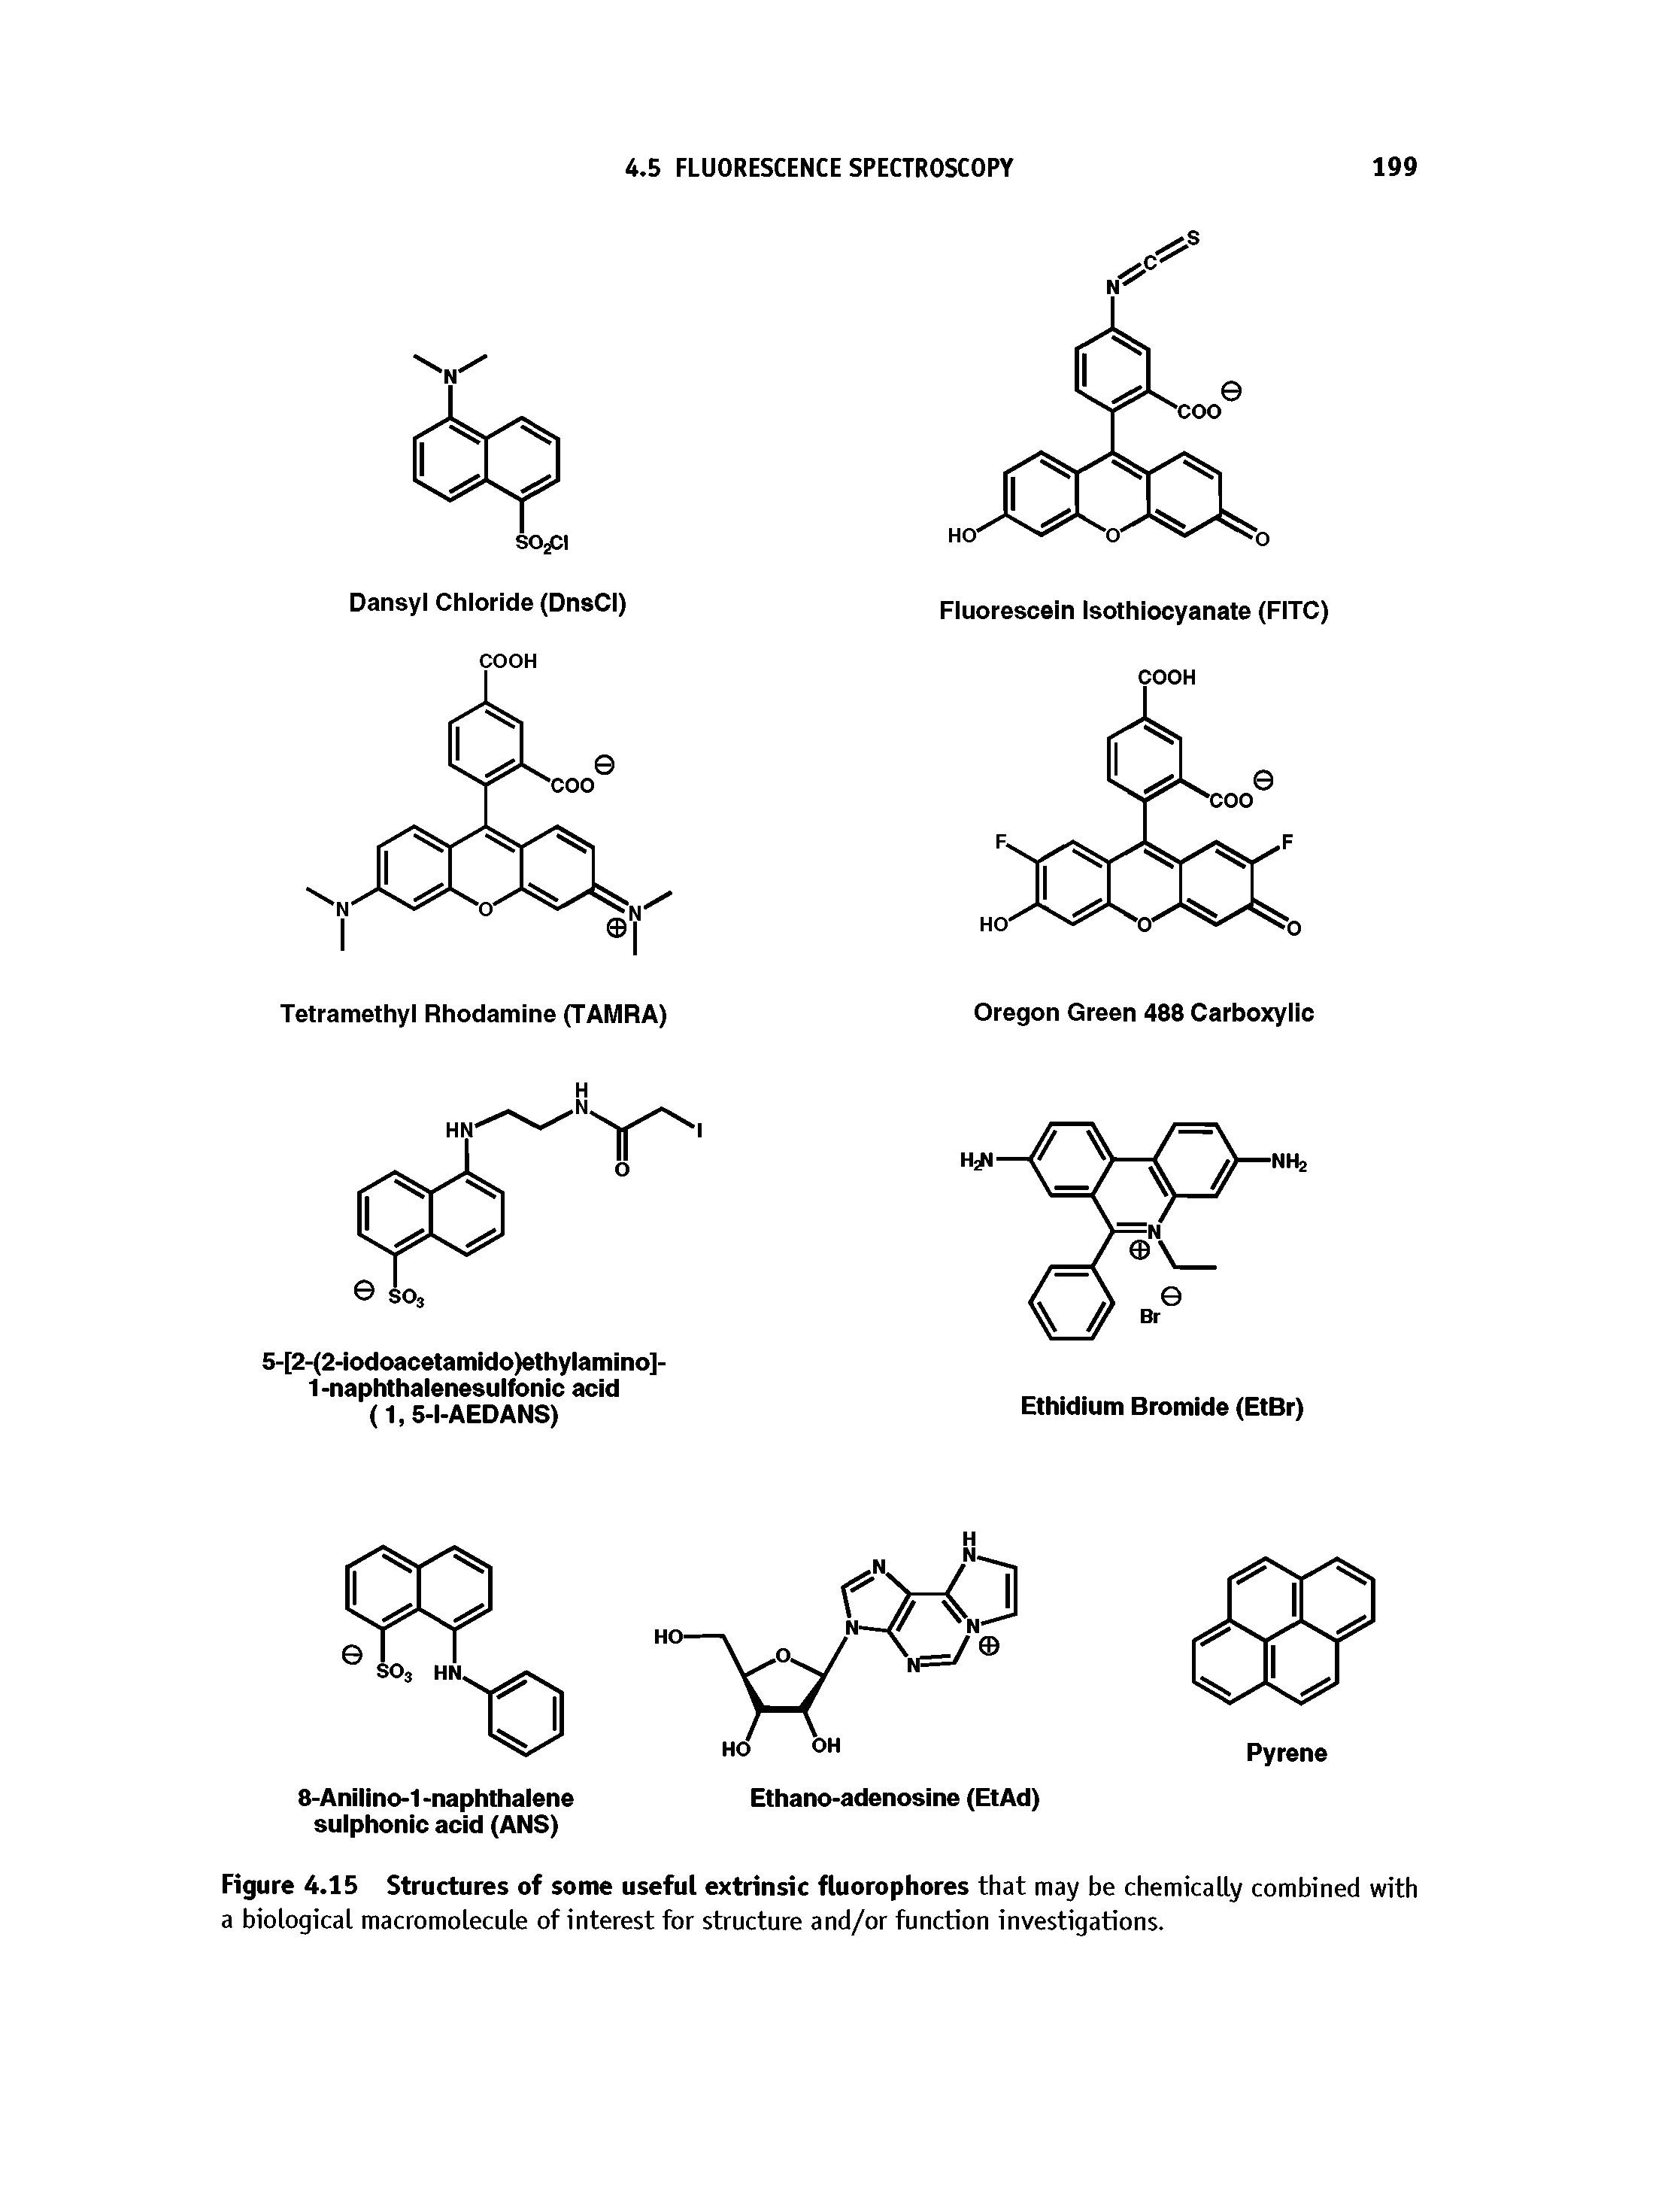 Figure 4.15 Structures of some useful extrinsic fluorophores that may be chemically combined with a biological macromolecule of interest for structure and/or function investigations.